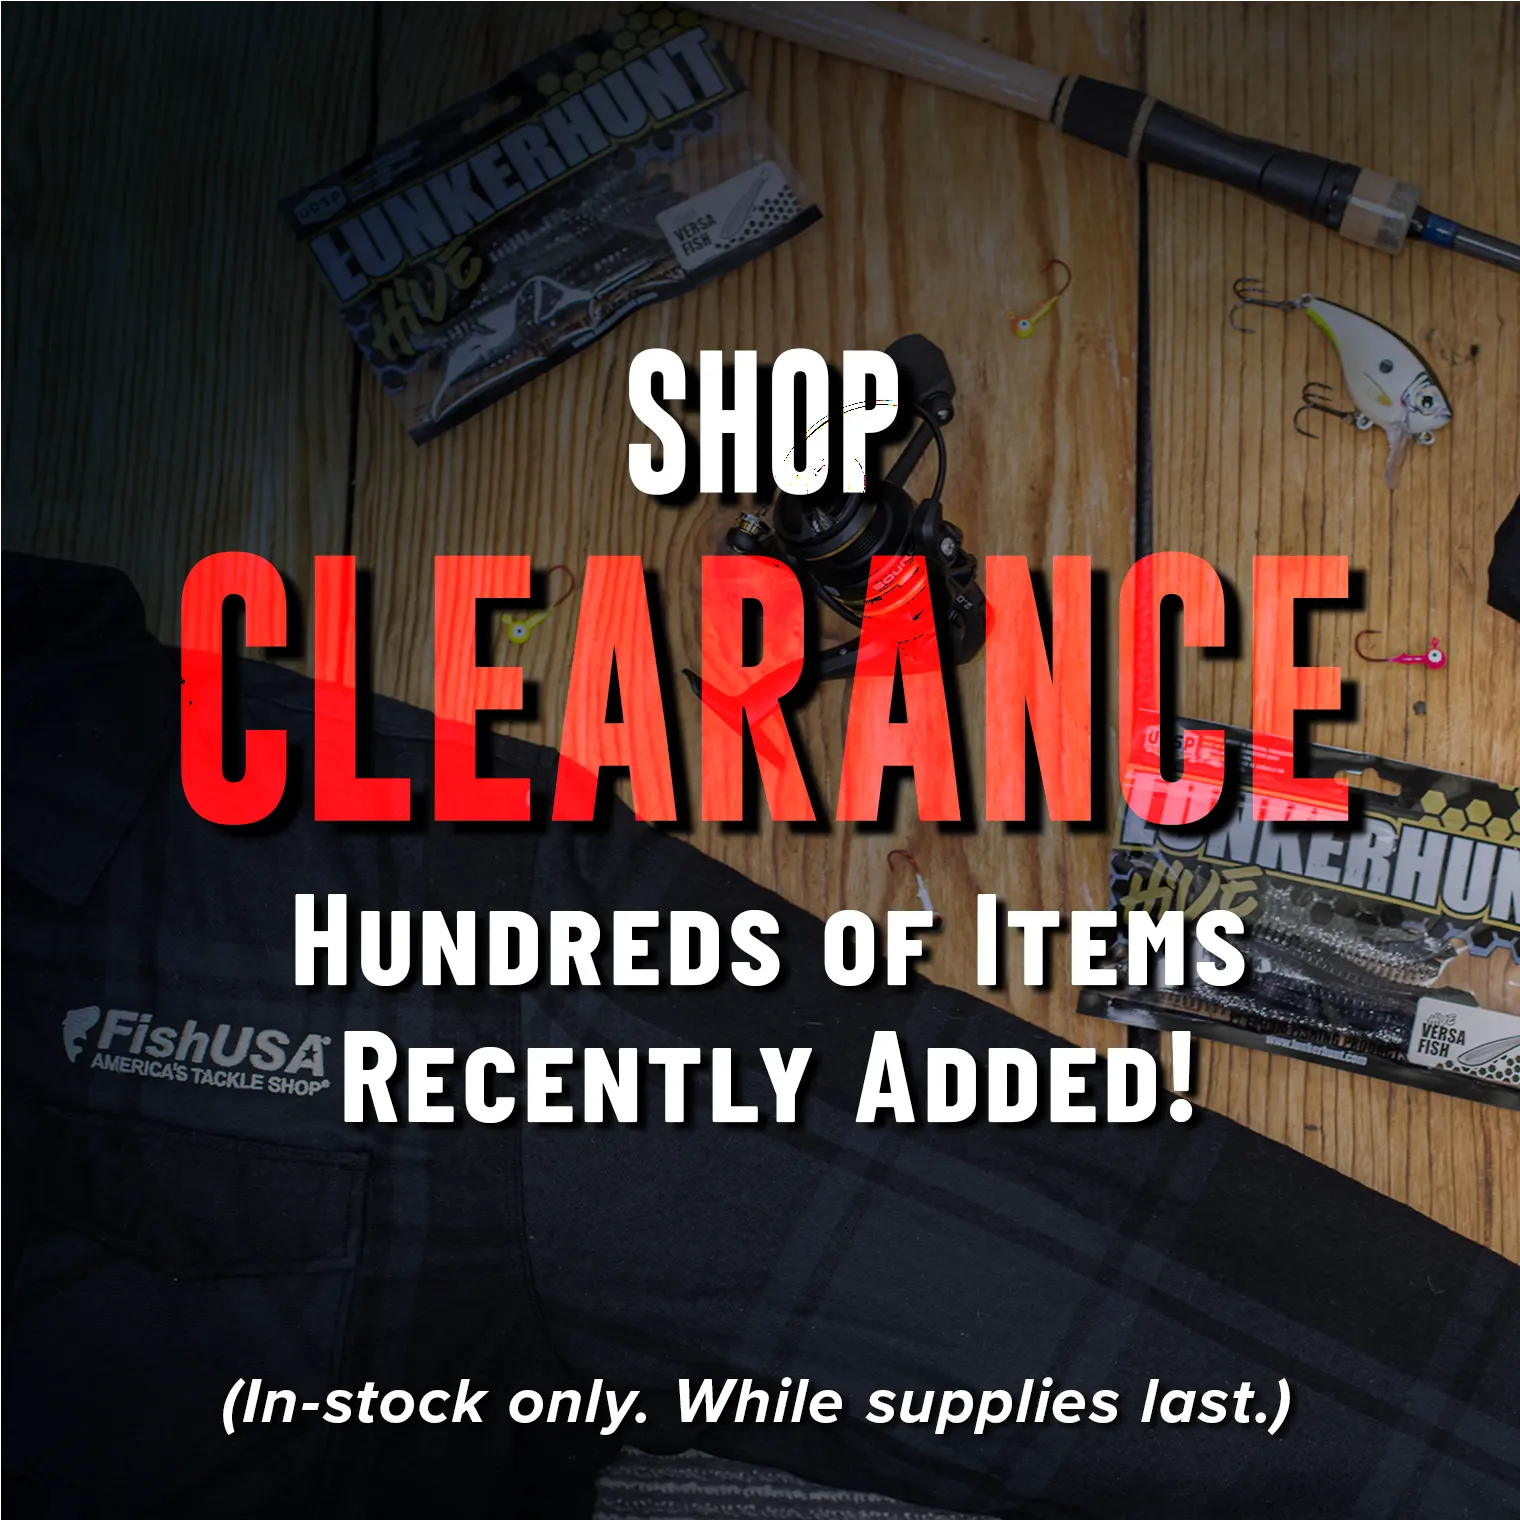 Shop Clearance - Hundreds of Items Recently Added!